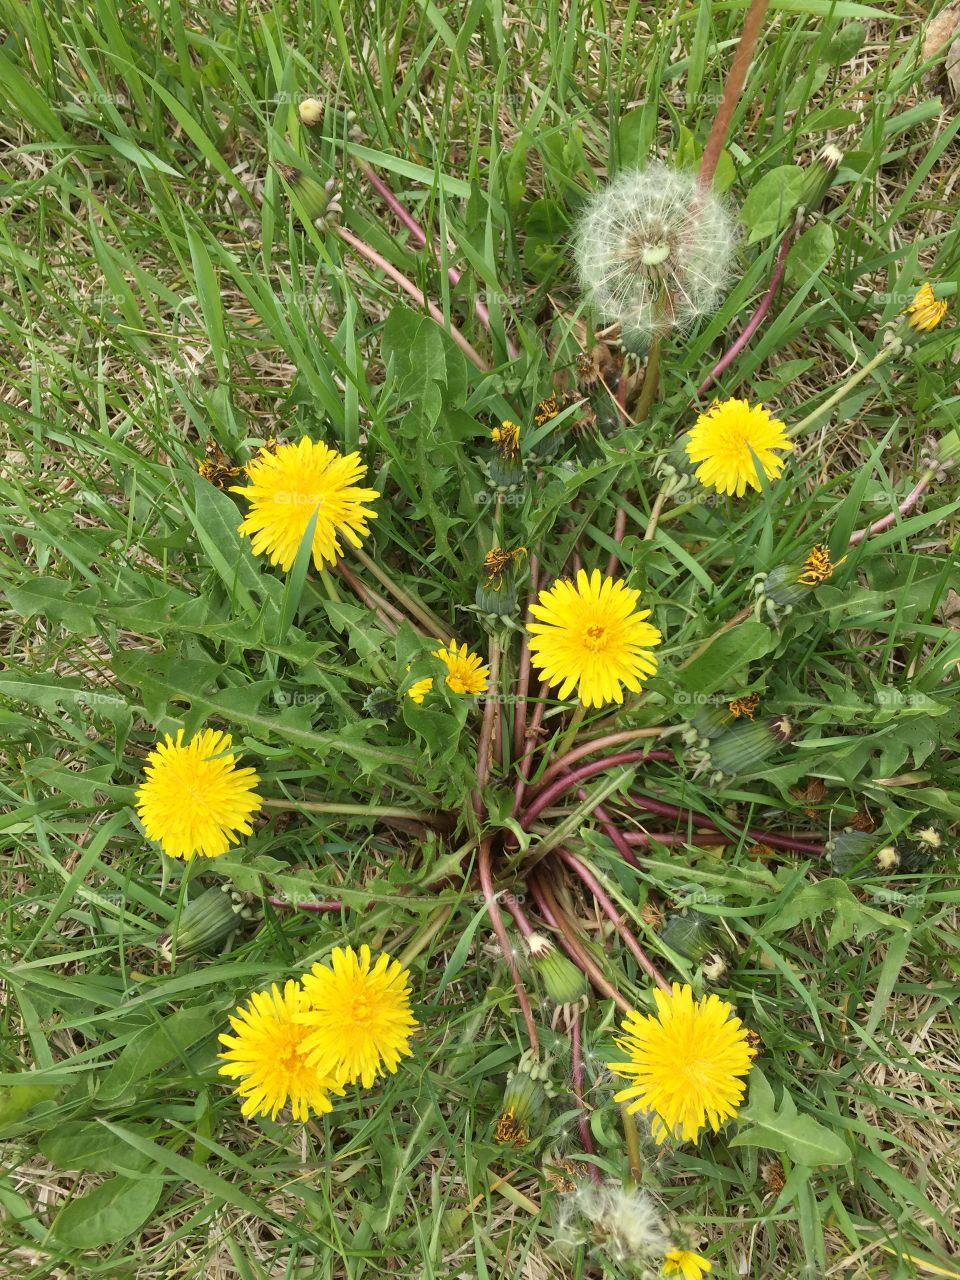 Dandelions and Summer Grassy Wishes